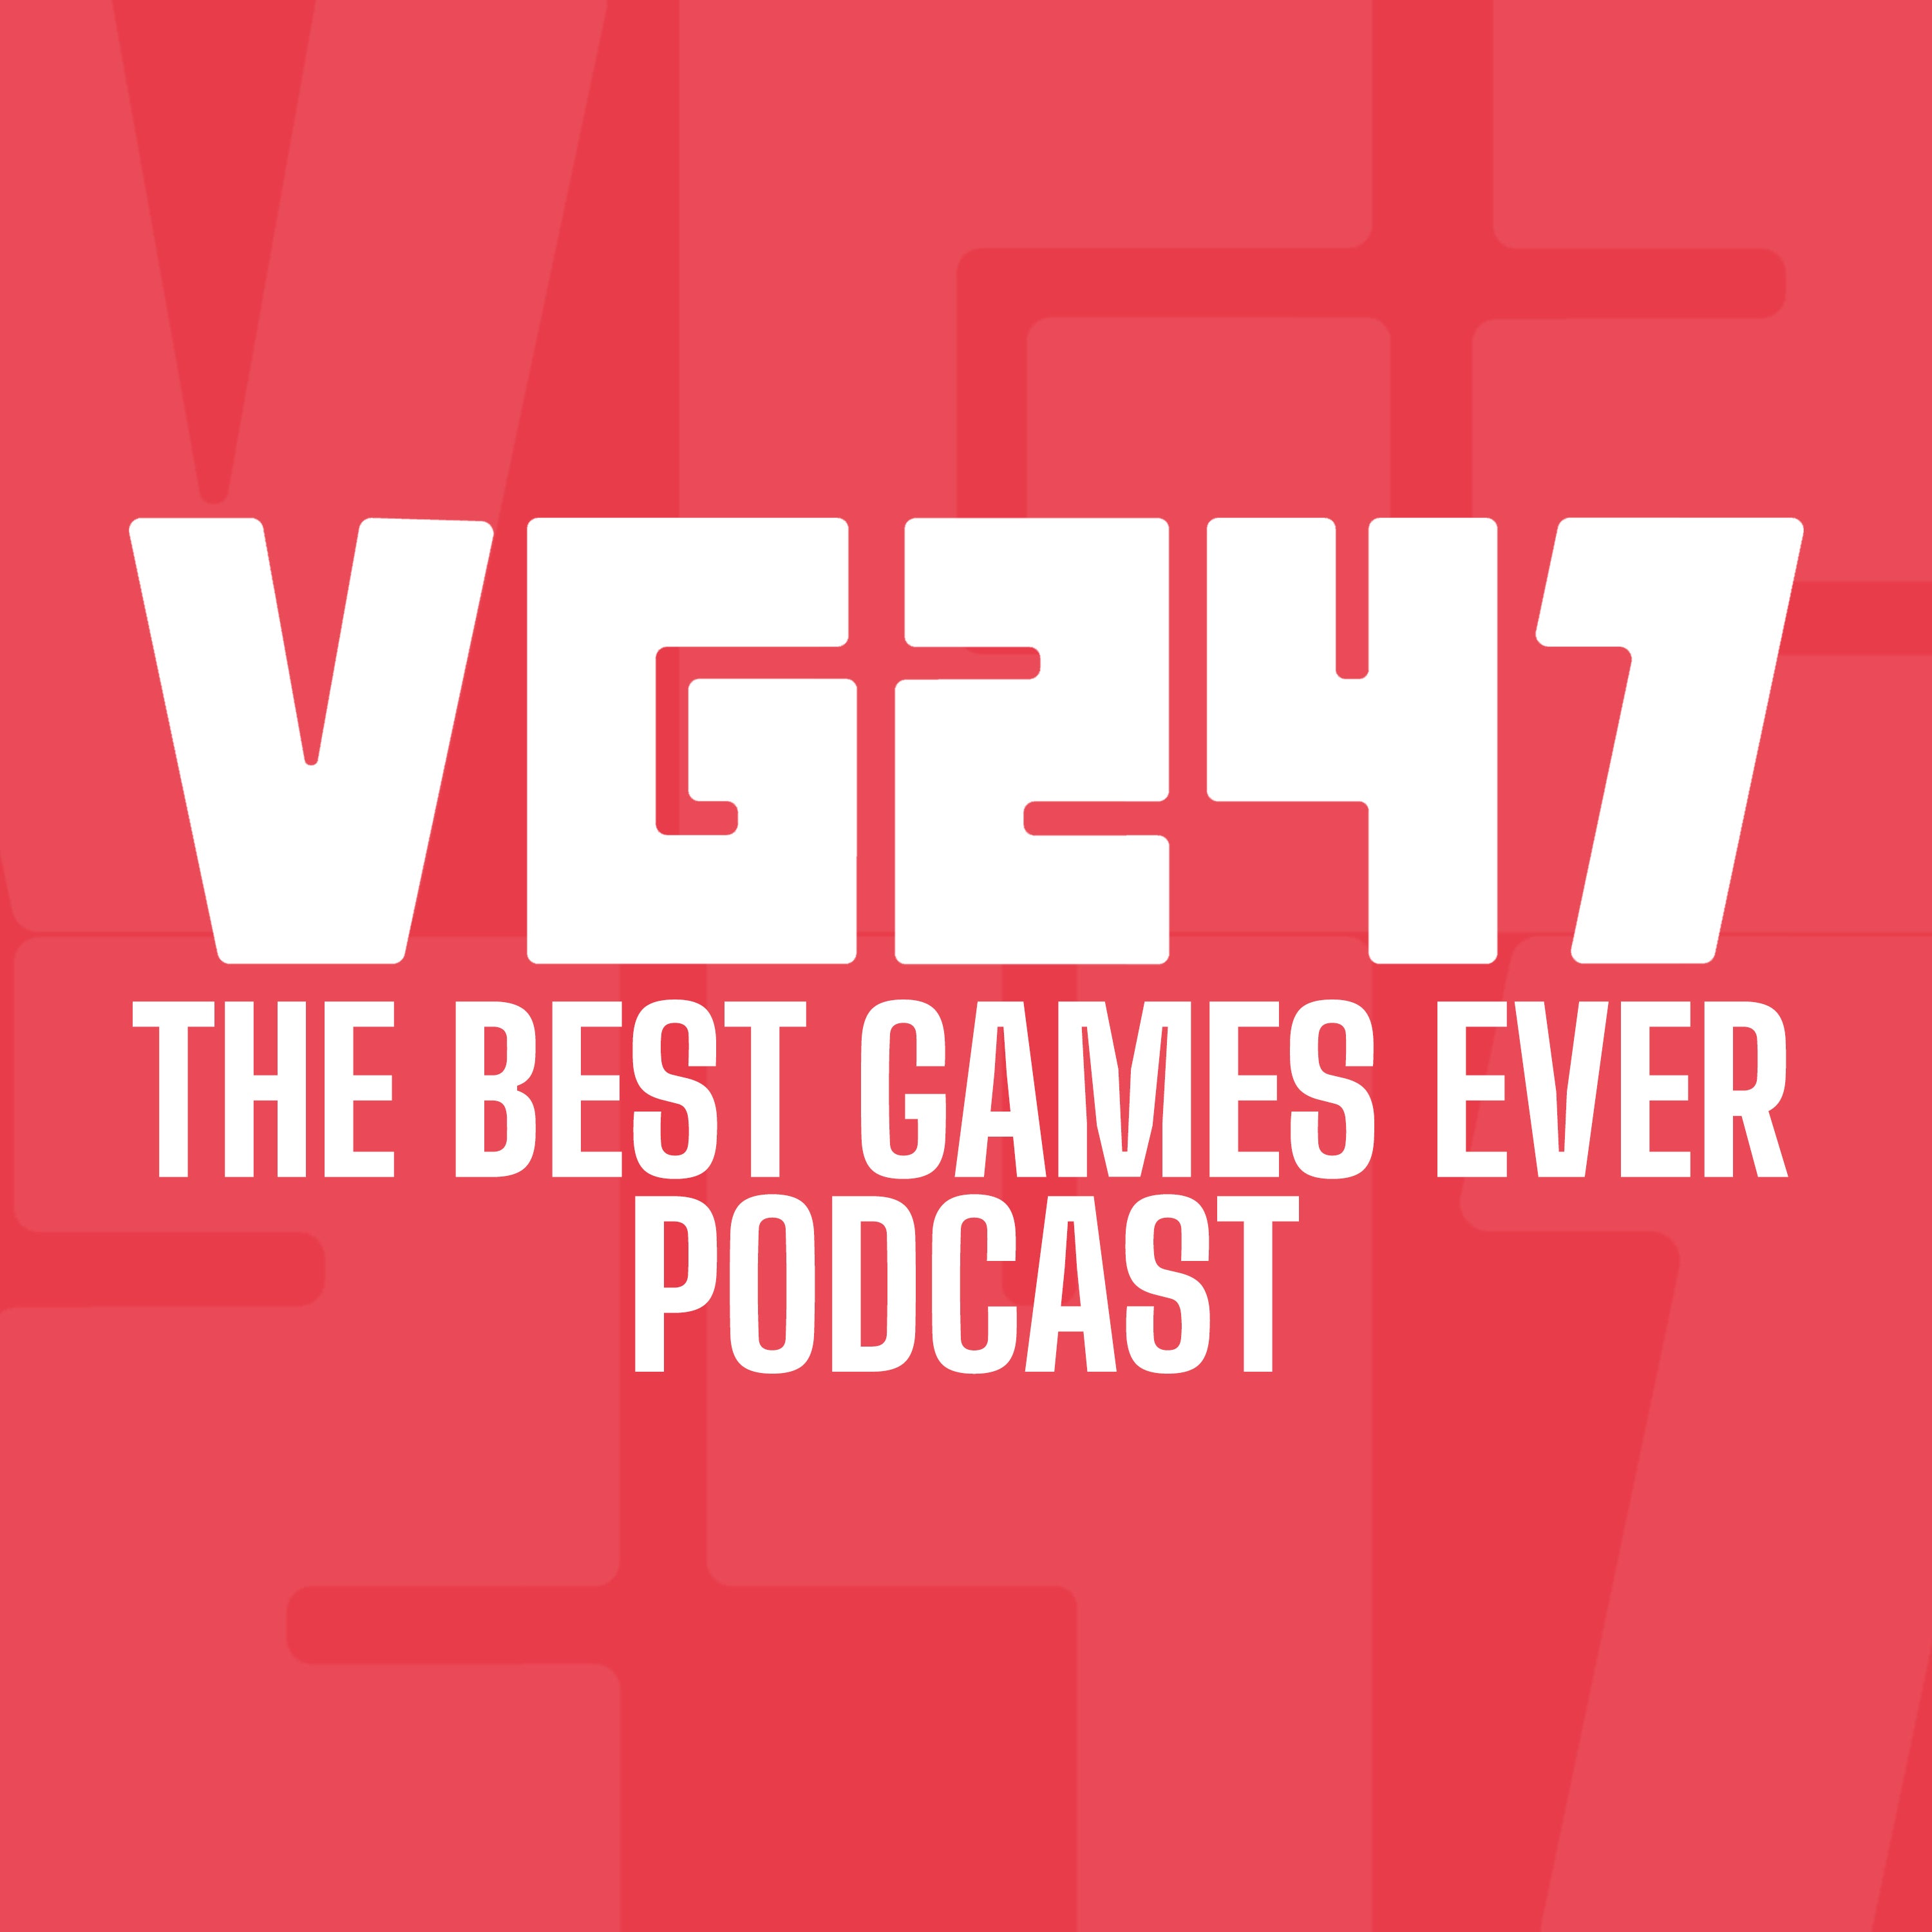 VG247's logo for the best gaming podcast ever. White text on red background.